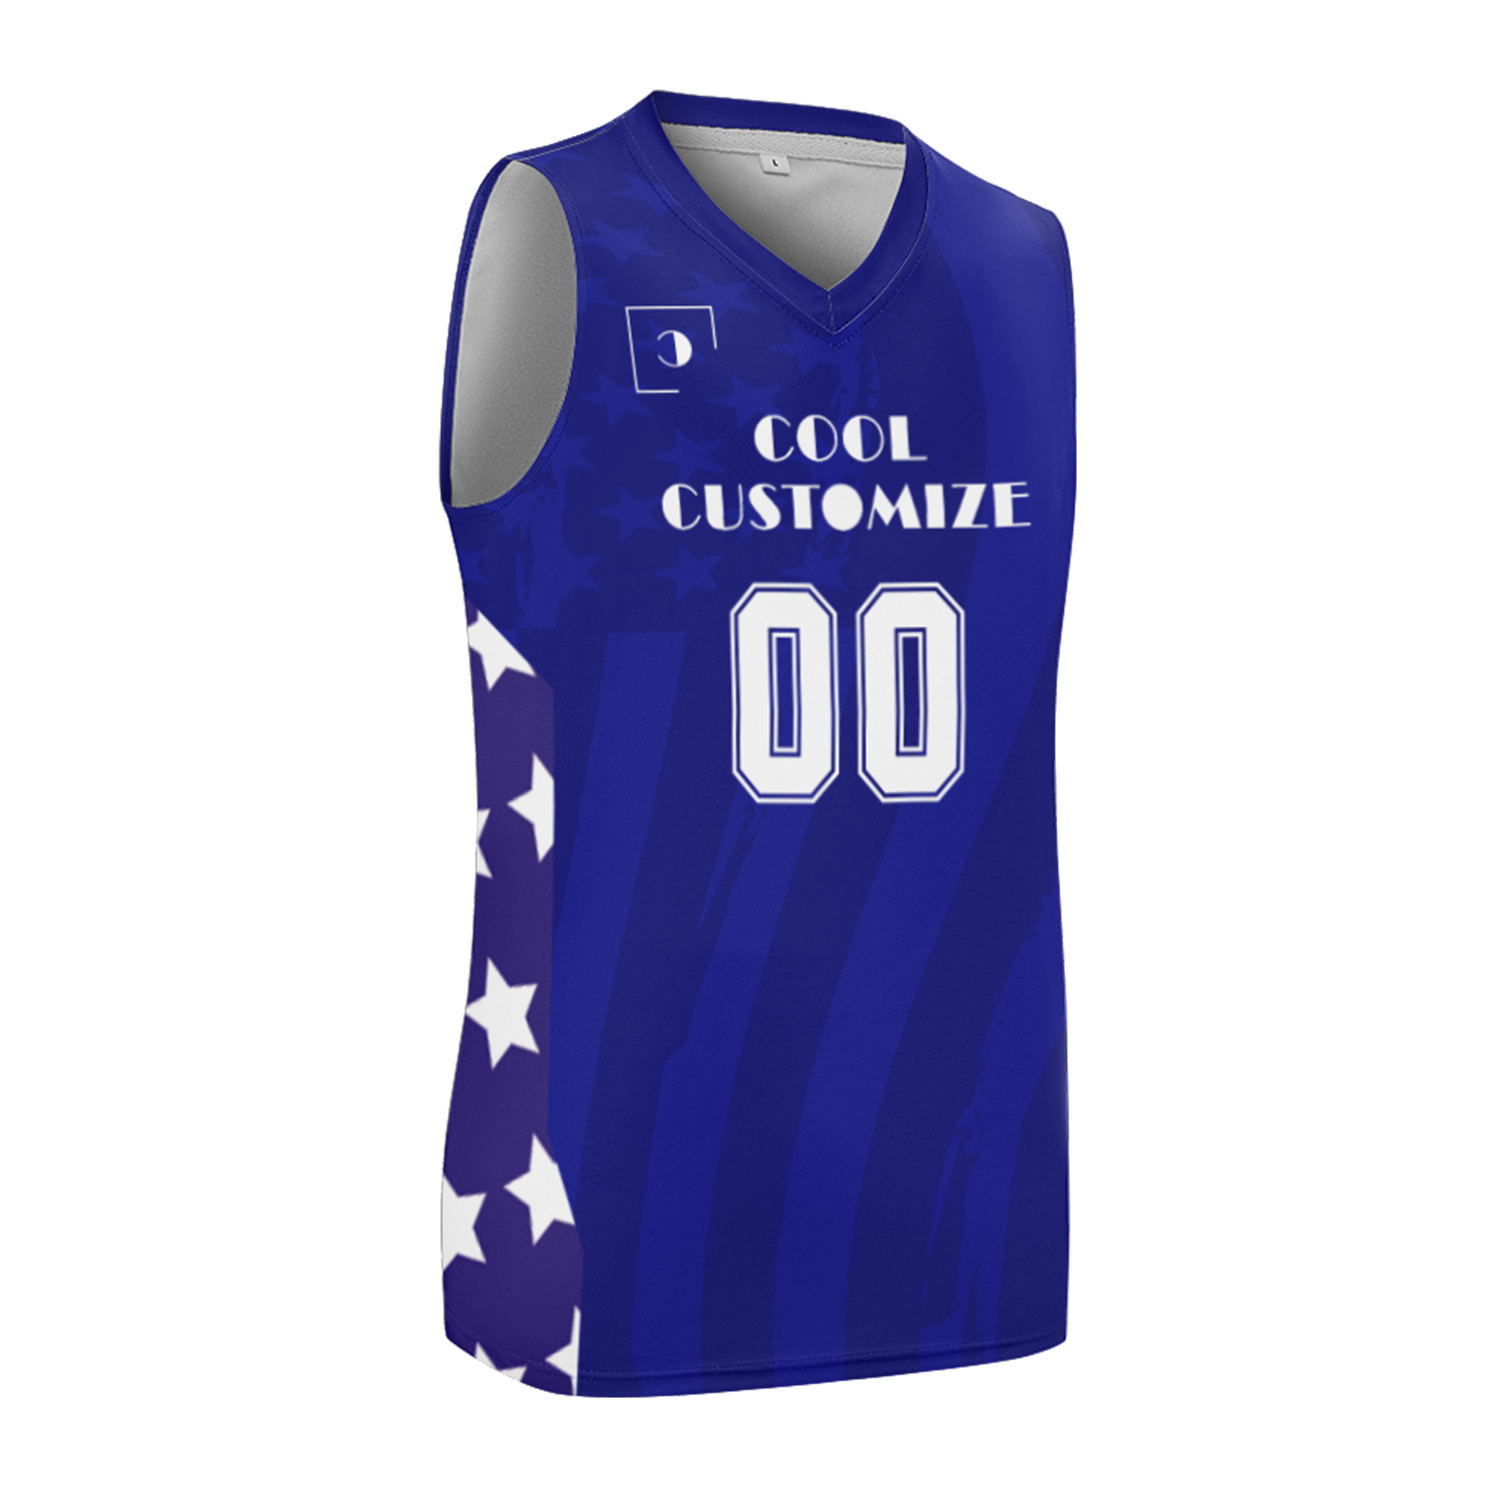 cool-customize-oem-5.3oz-pinhole-mesh-basketball-uniforms-top-quality-personalized-design-basketball-jersey-suits-5